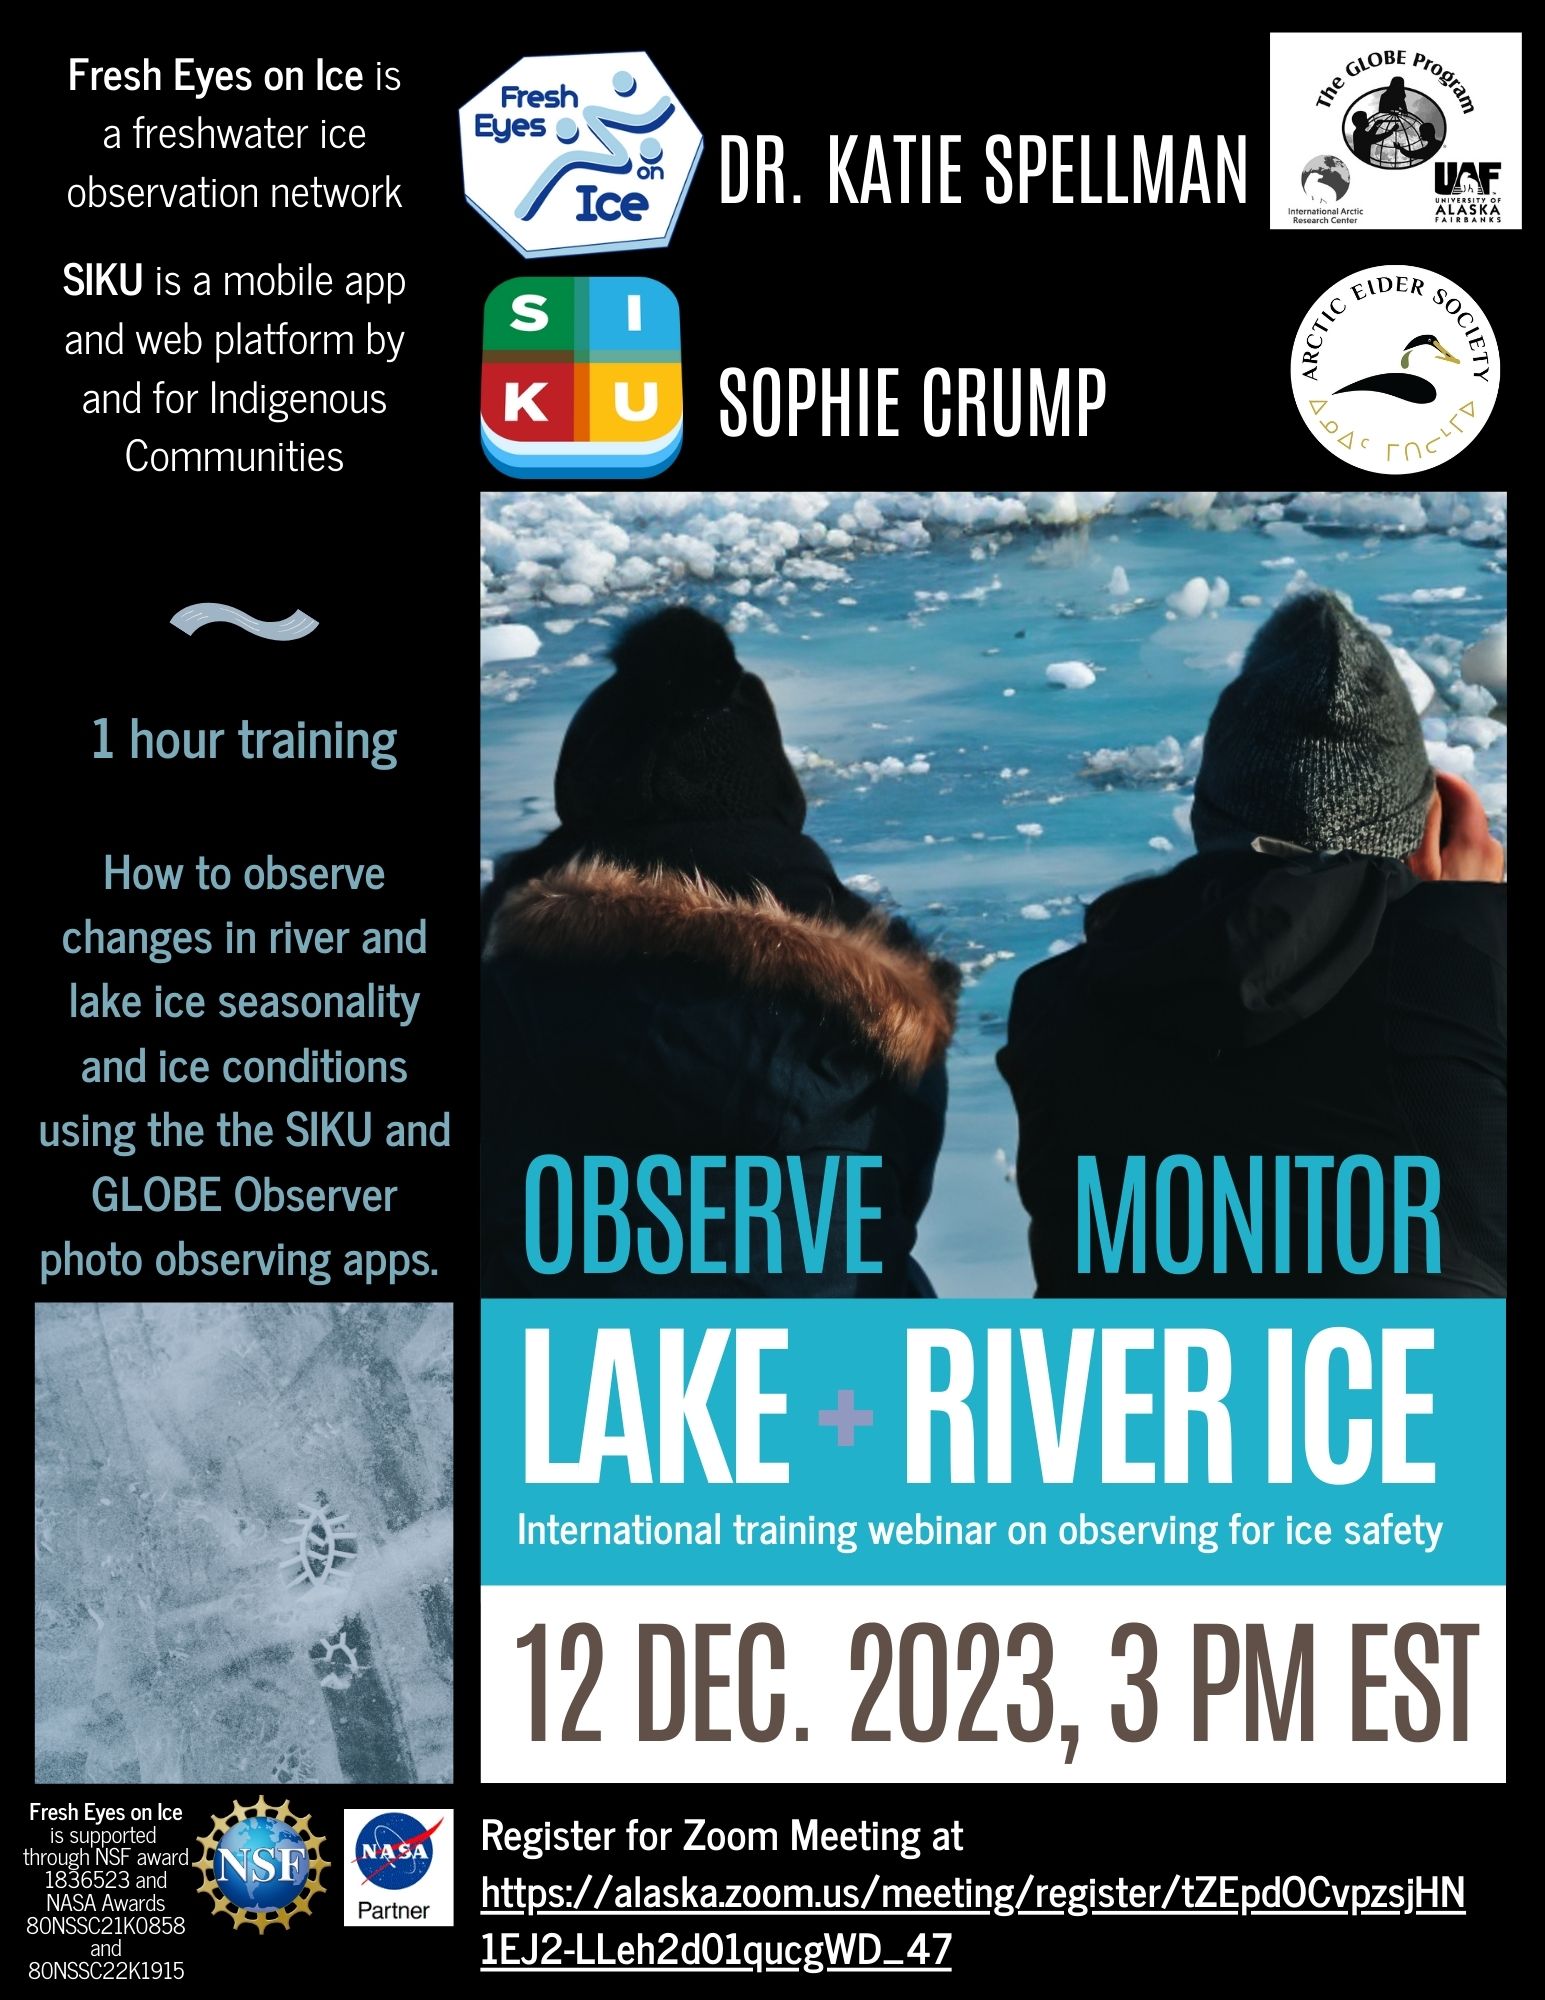 Two people in winter clothing look at ice on a river. Image text reads: Fresh Eyes on Ice is a freshwater ice observation network. SIKU is a mobile app and web platform by and for Indigenous Communities. Observe, Monitor Lake and river ice. International webinar on observing for ice safety. 